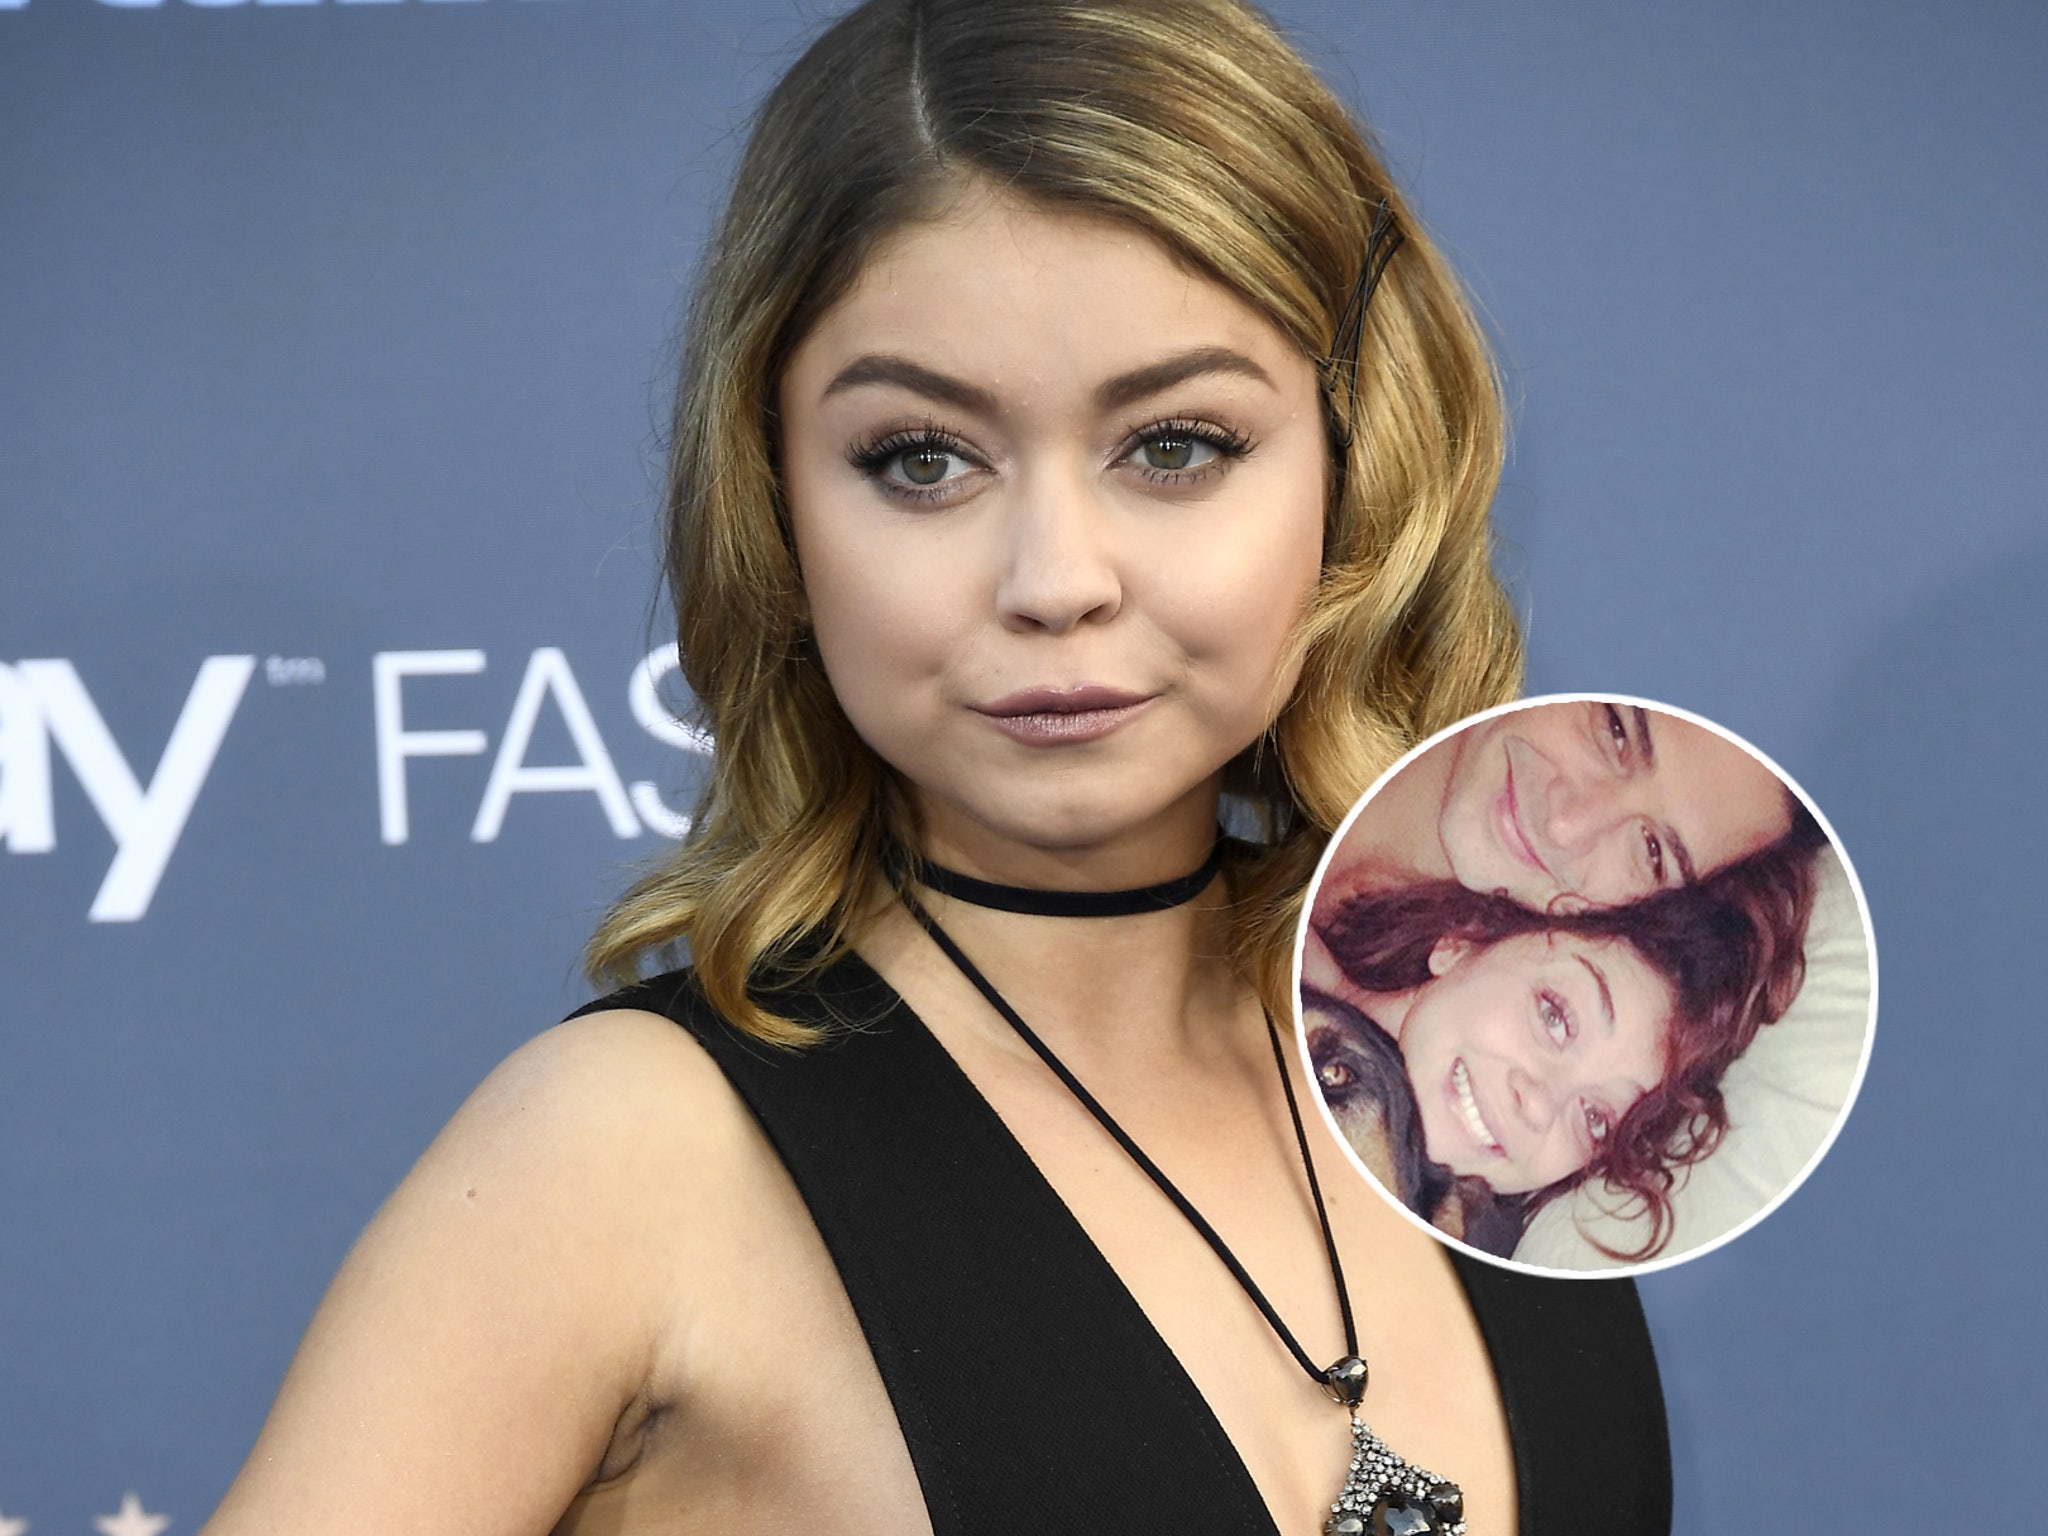 Sarah Hyland Hardcore Porn - Sarah Hyland Claps Back at Angry Fan Demanding 'KEEP YOUR SEXUAL LIFE  PRIVATE'